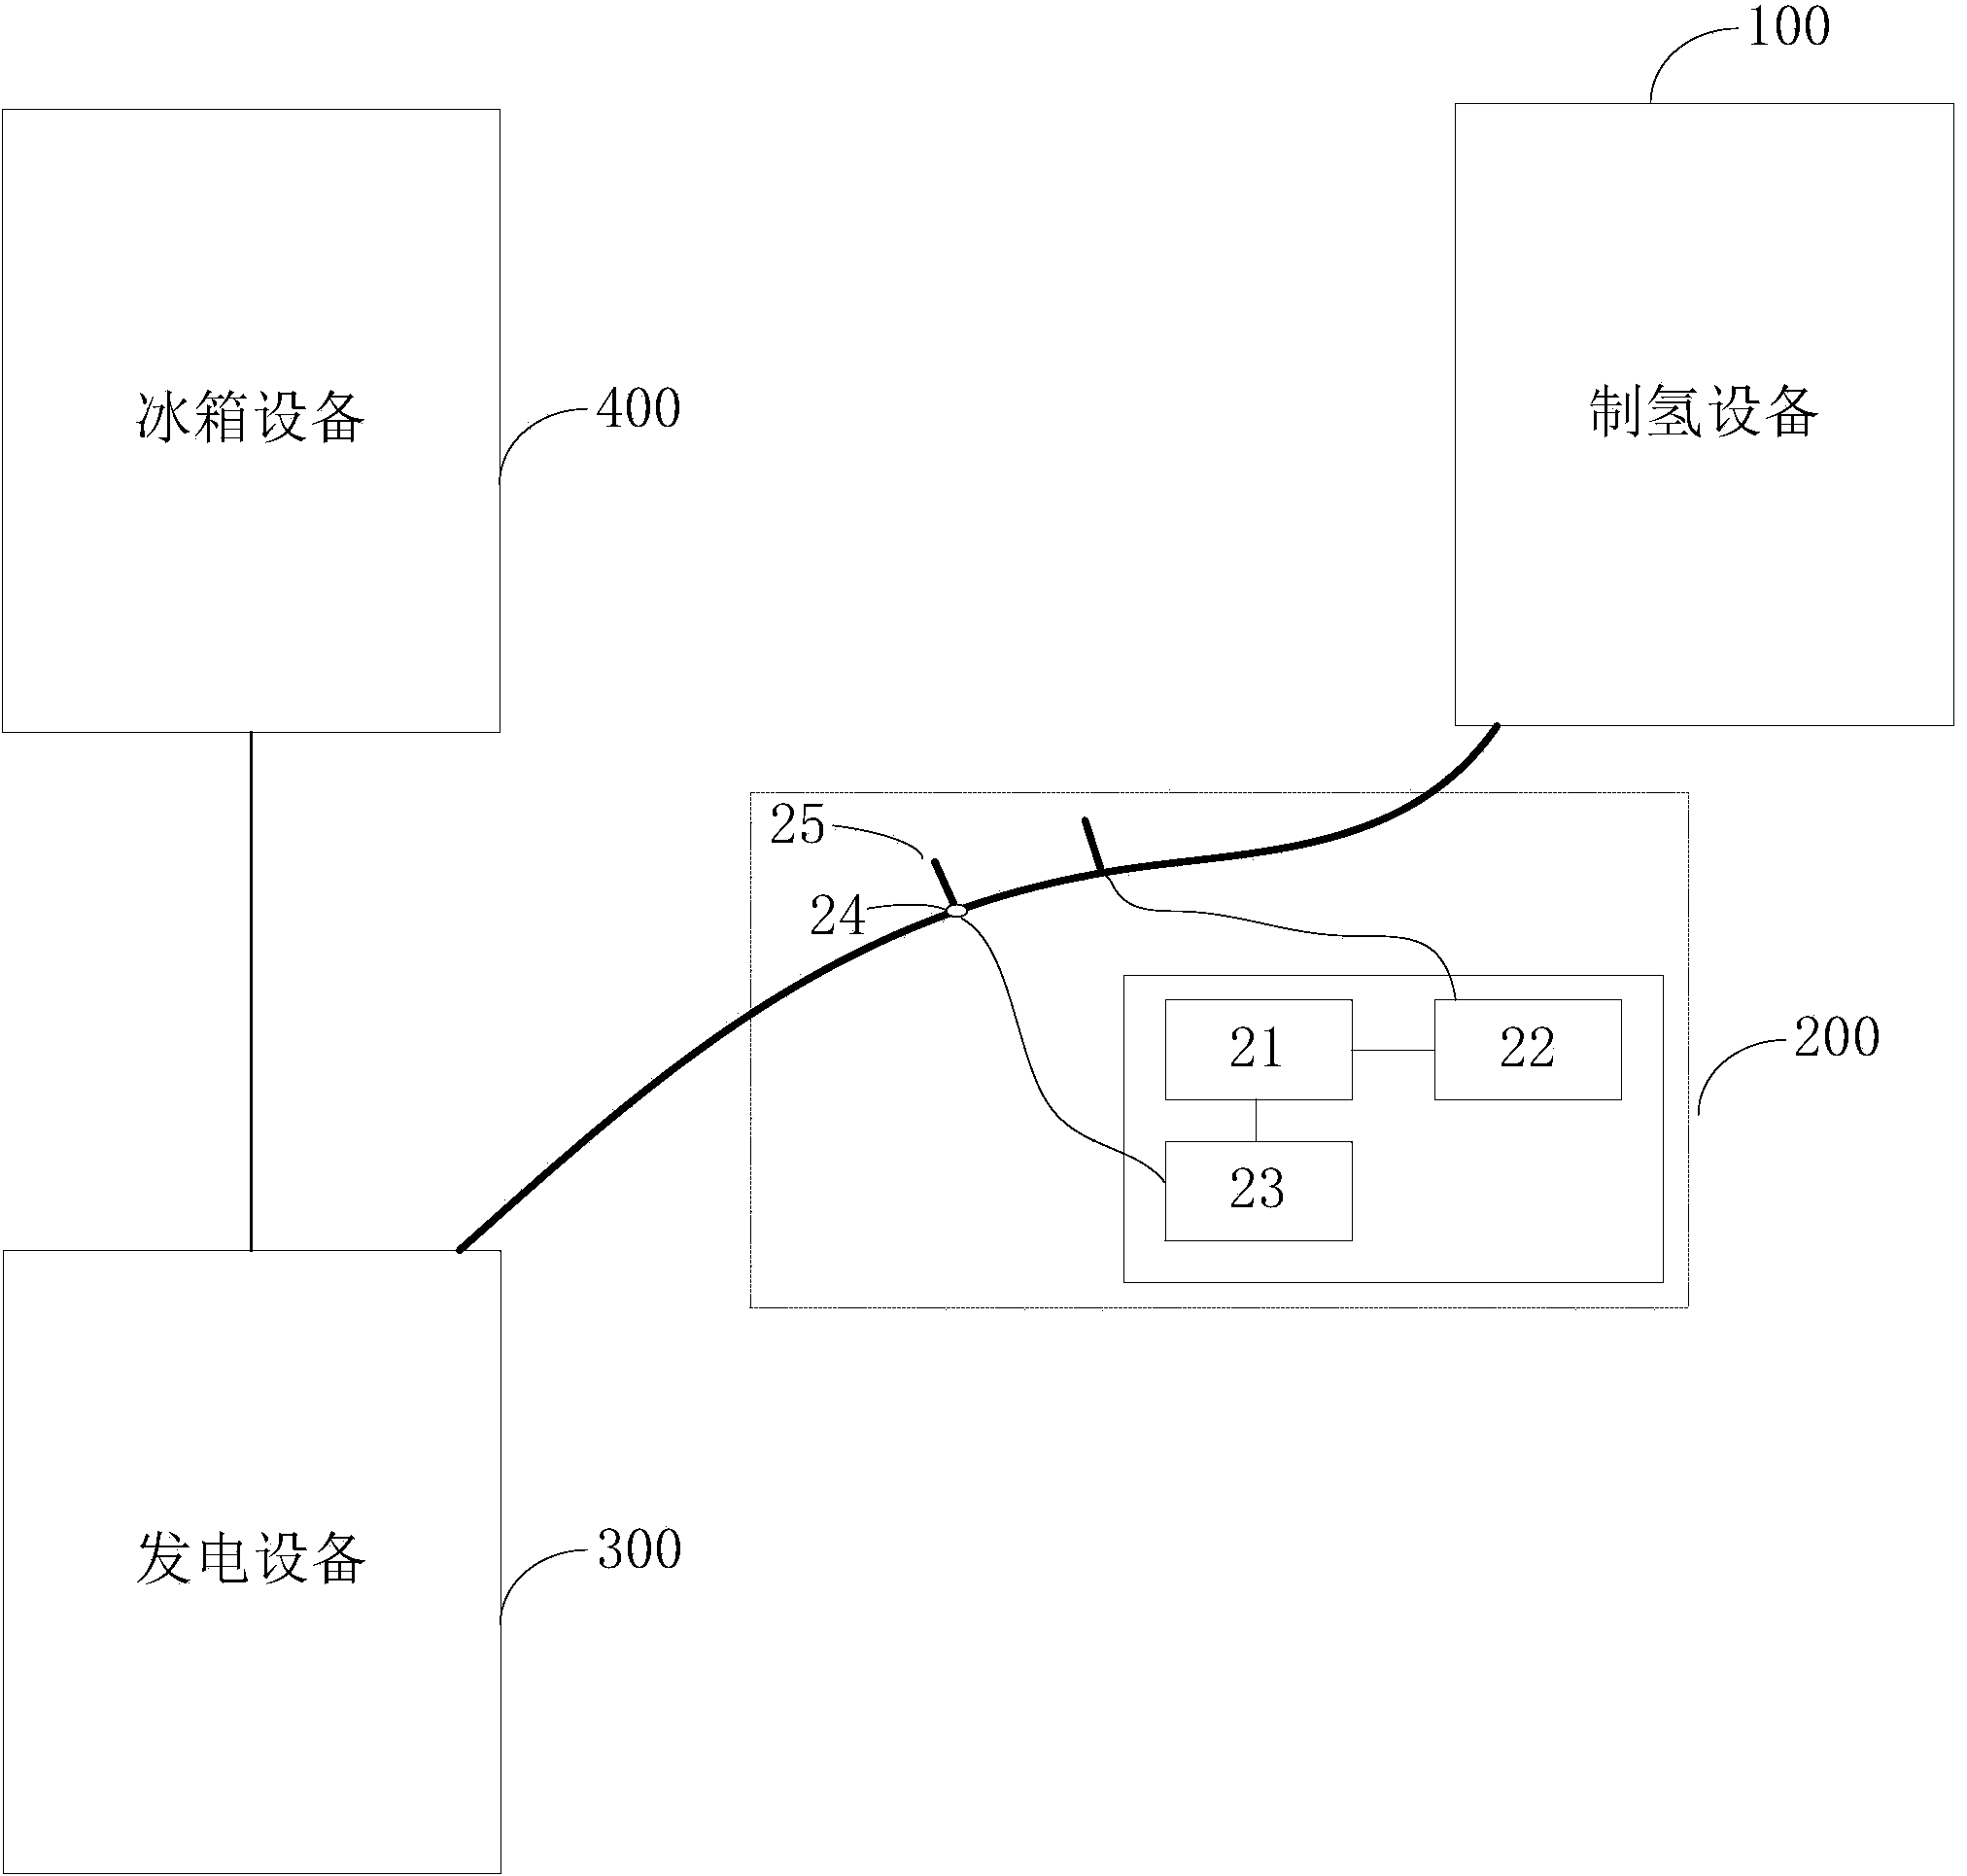 Methyl alcohol reforming electricity generation refrigerator system and control method